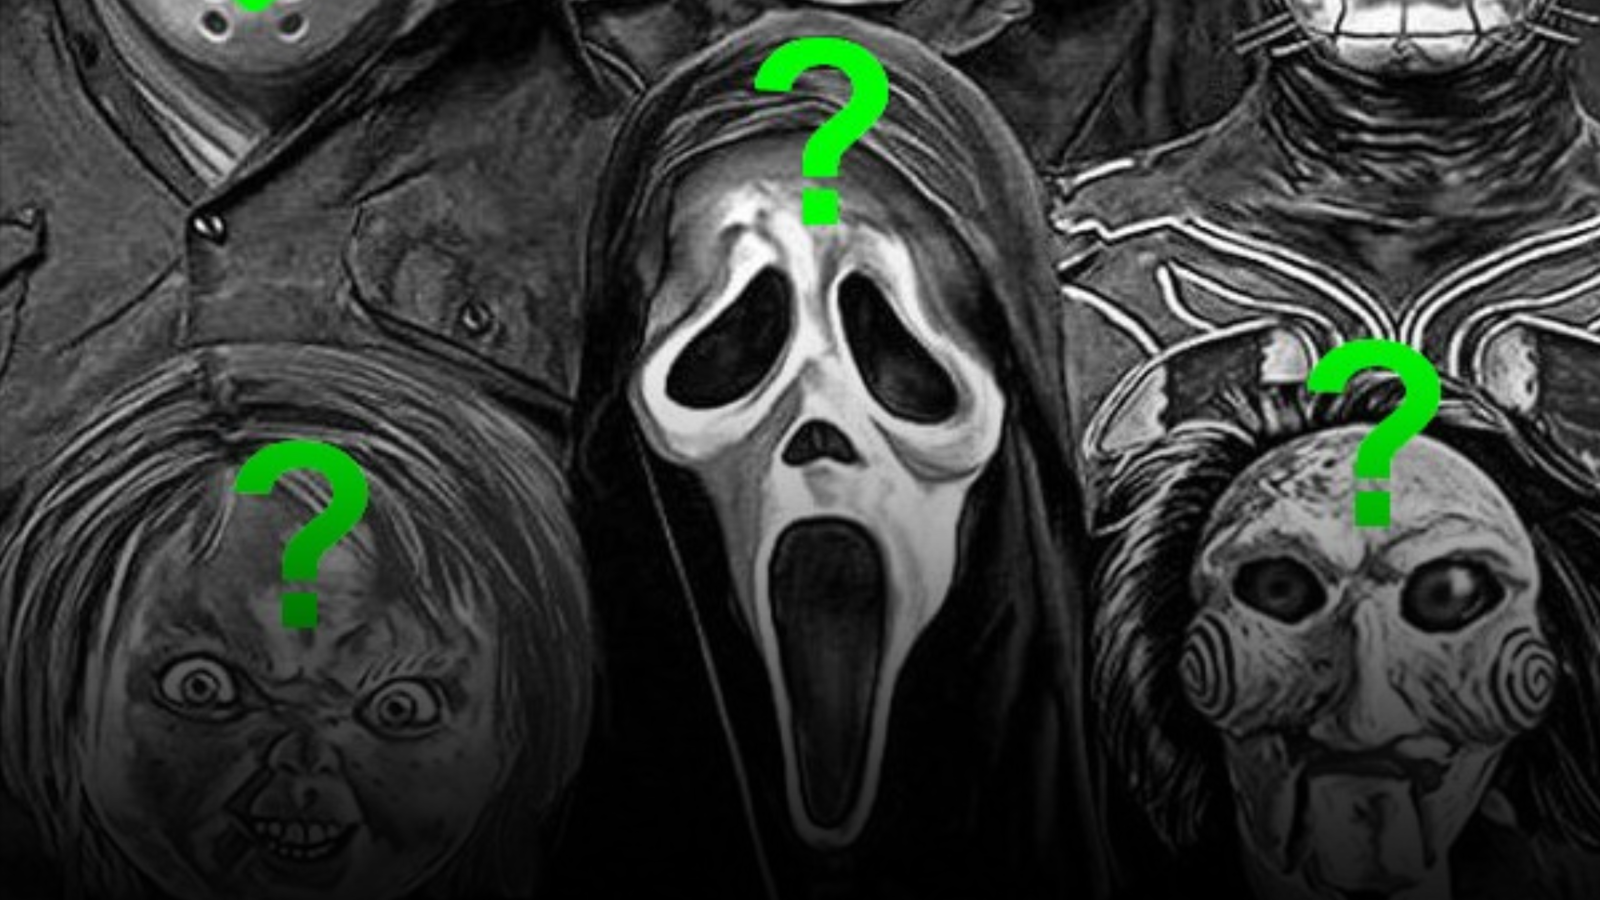 Mortal Kombat 1 May Jump From Superheroes to Horror by Adding Scream’s Ghostface to the Roster